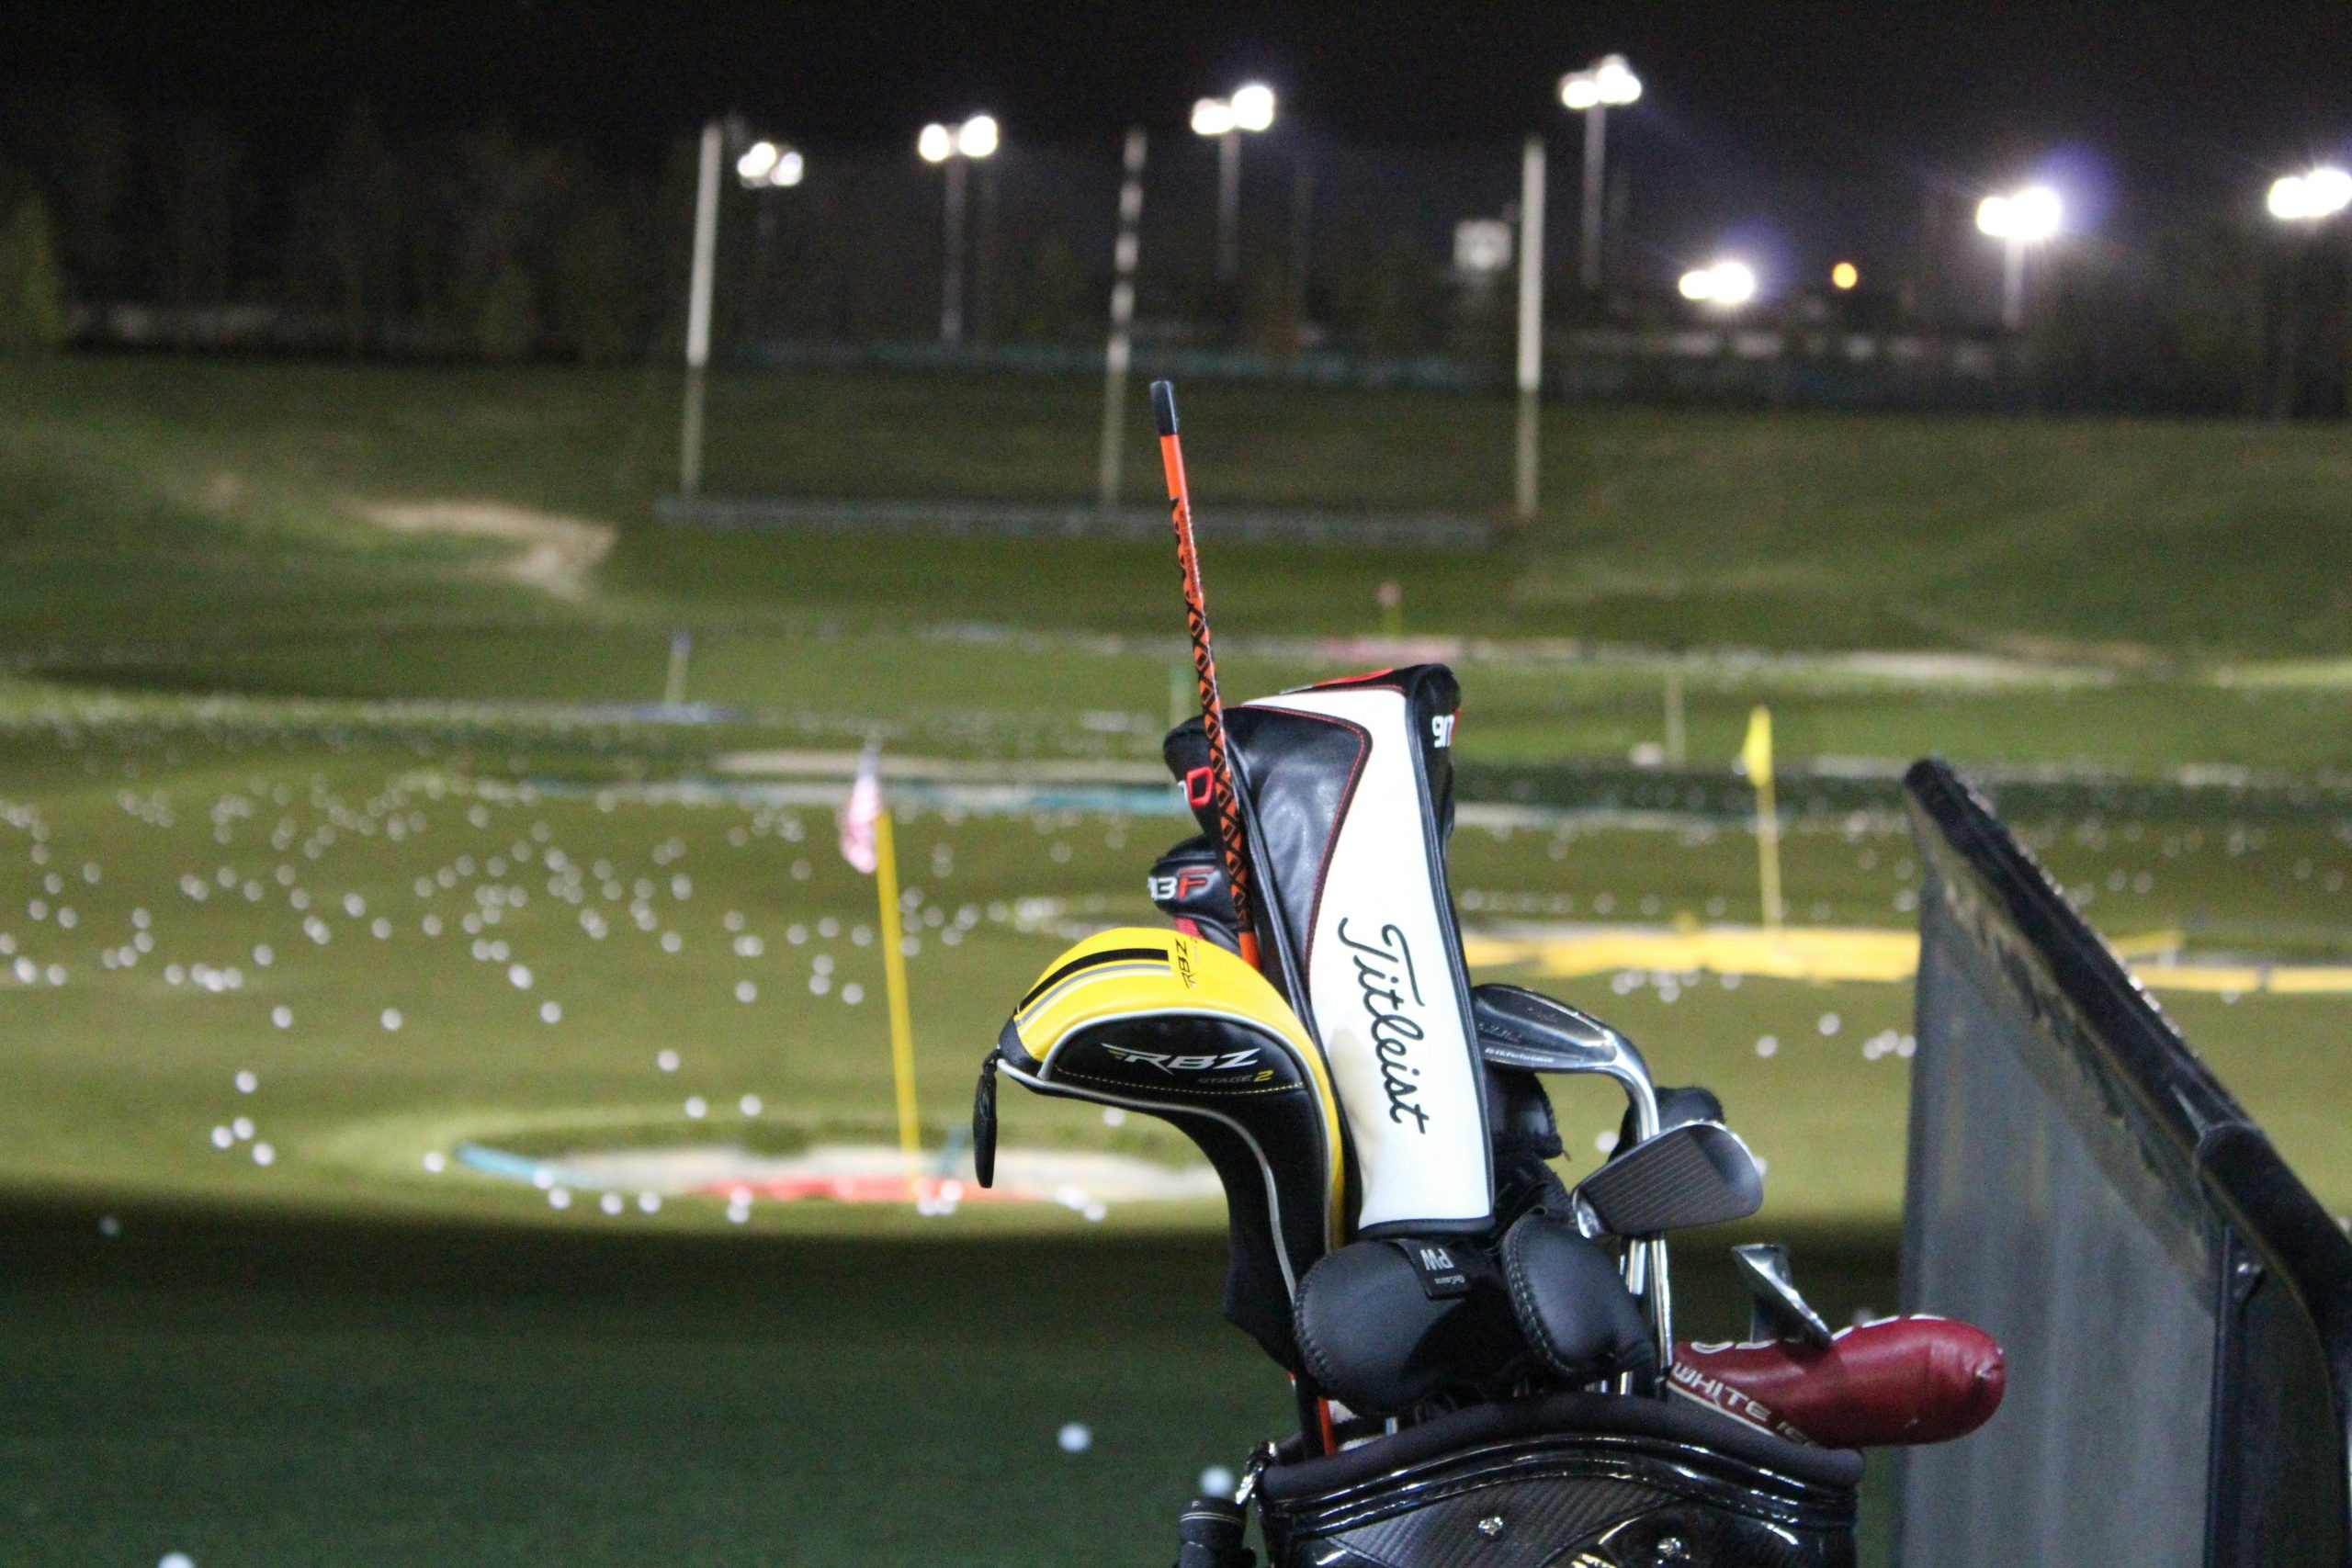 Golf Clubs overlooking TopGolf facility